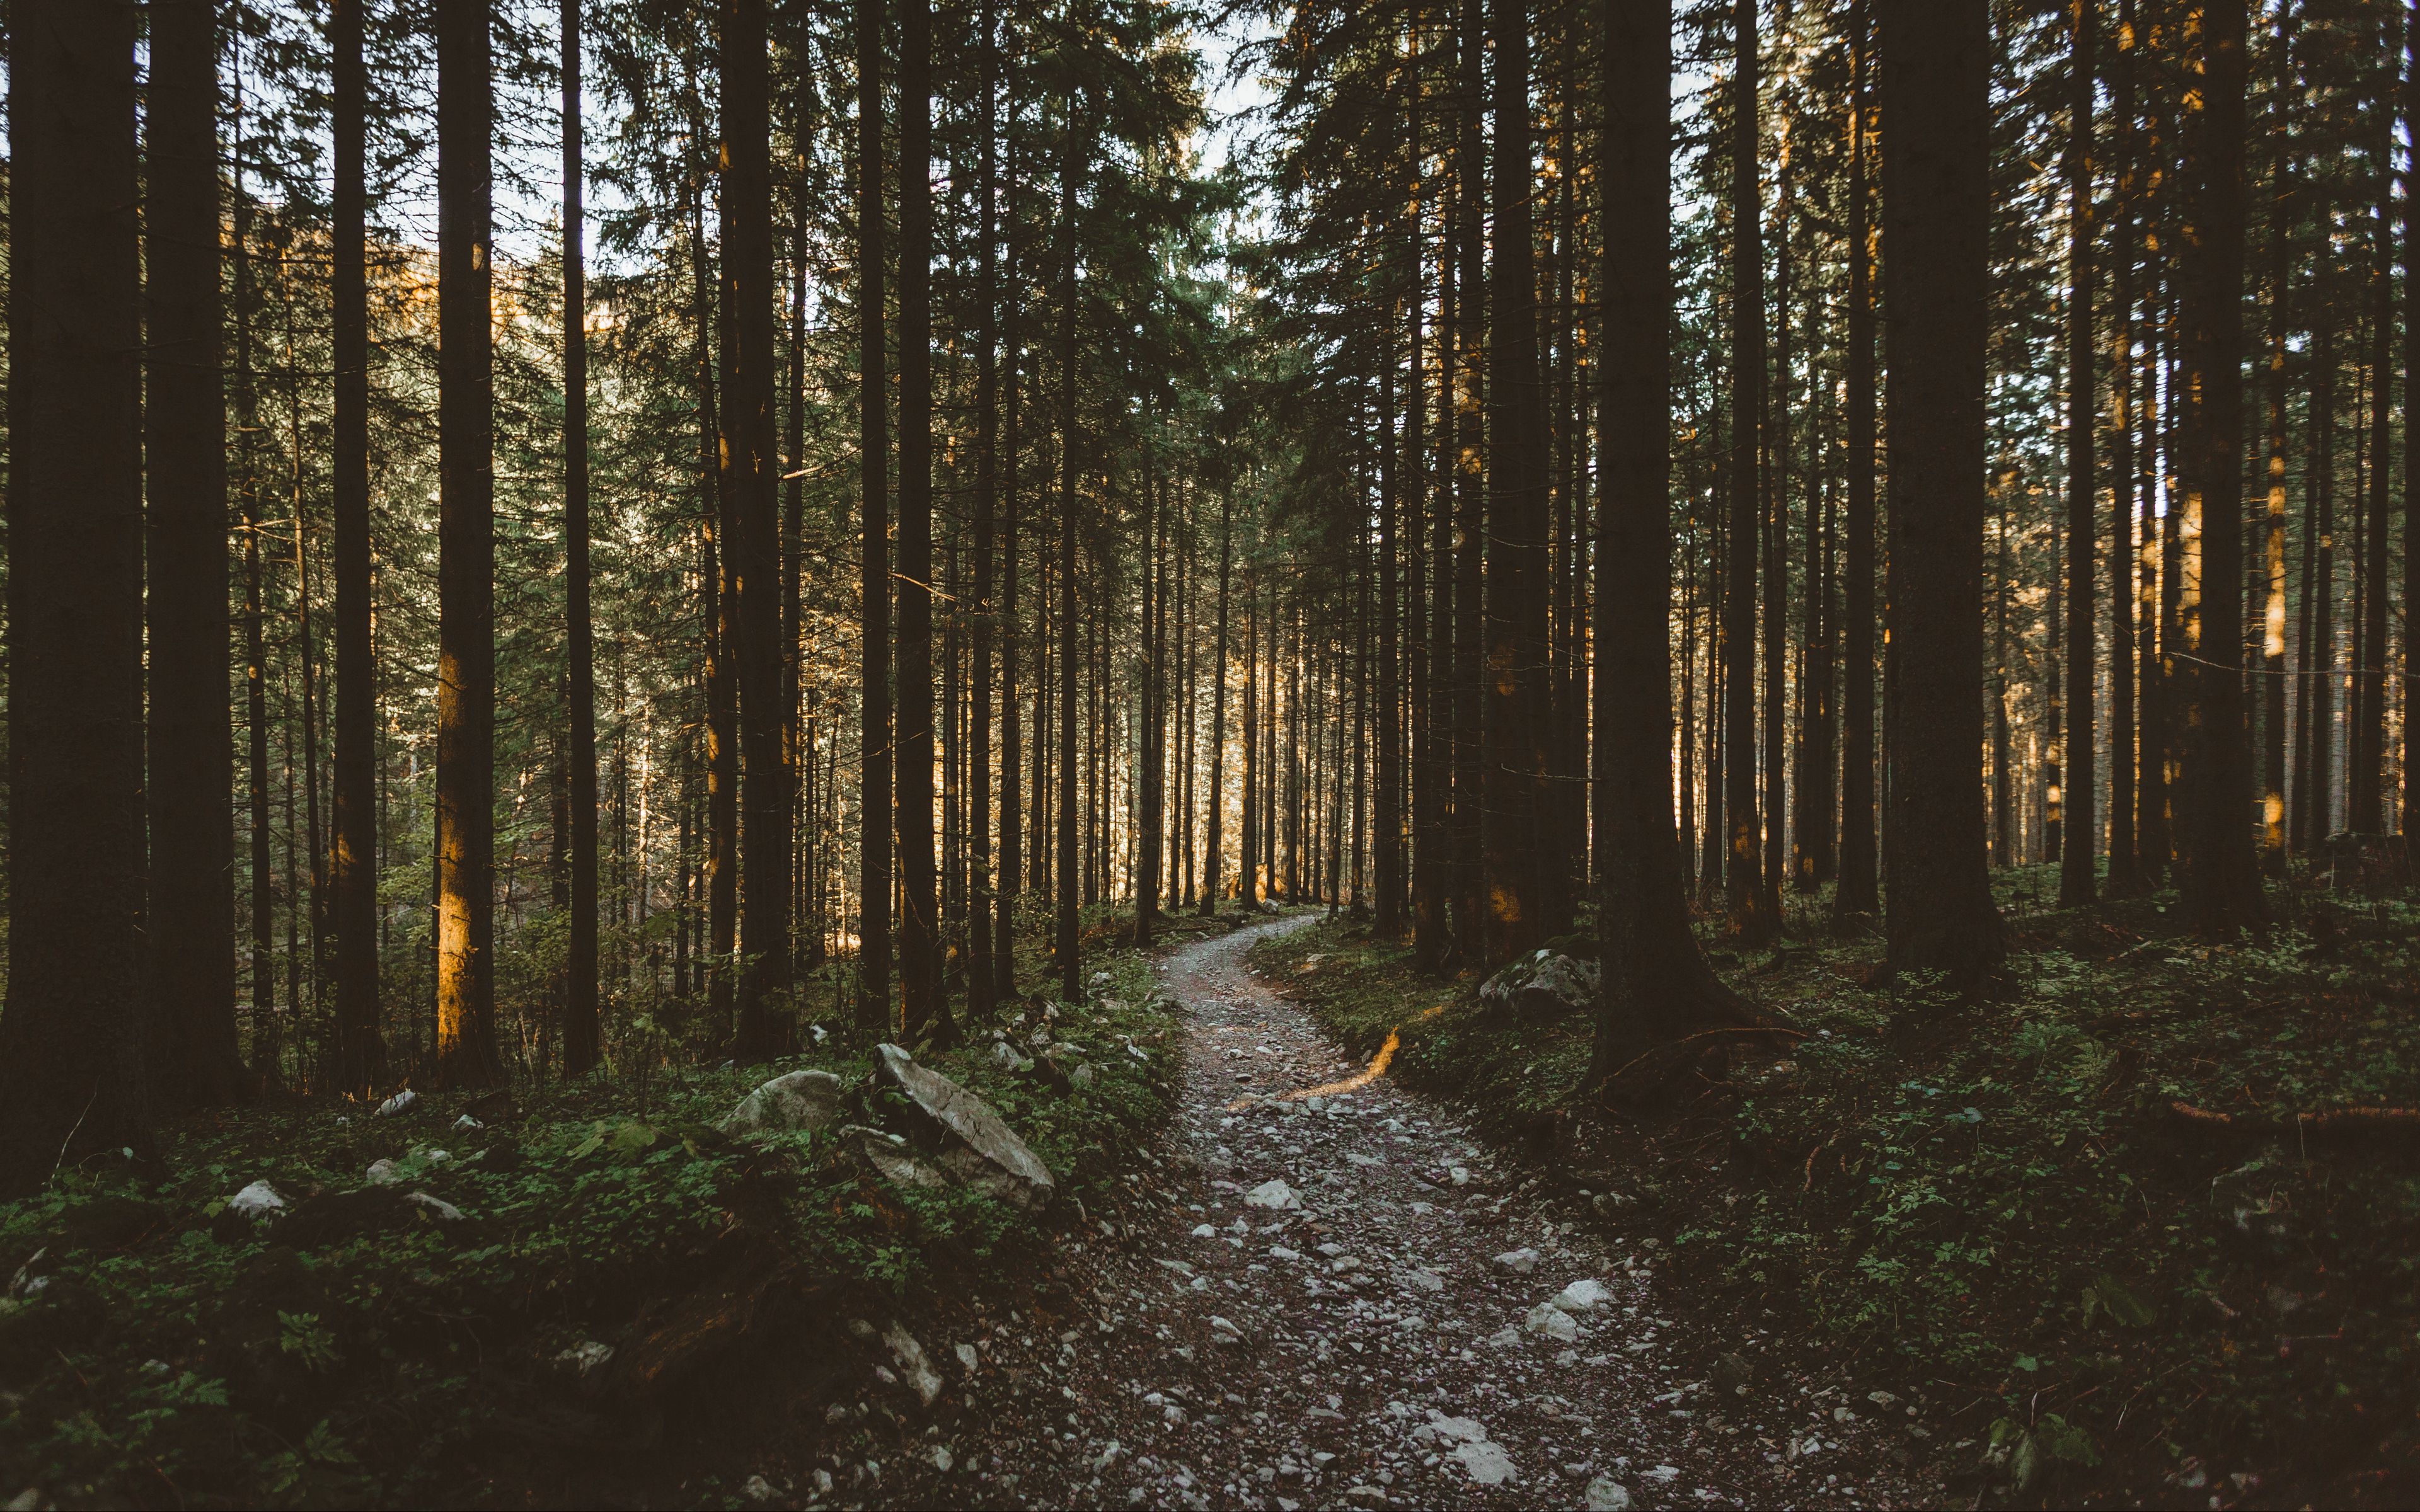 Download wallpaper 3840x2400 forest, pathway, trees, sunlight 4k